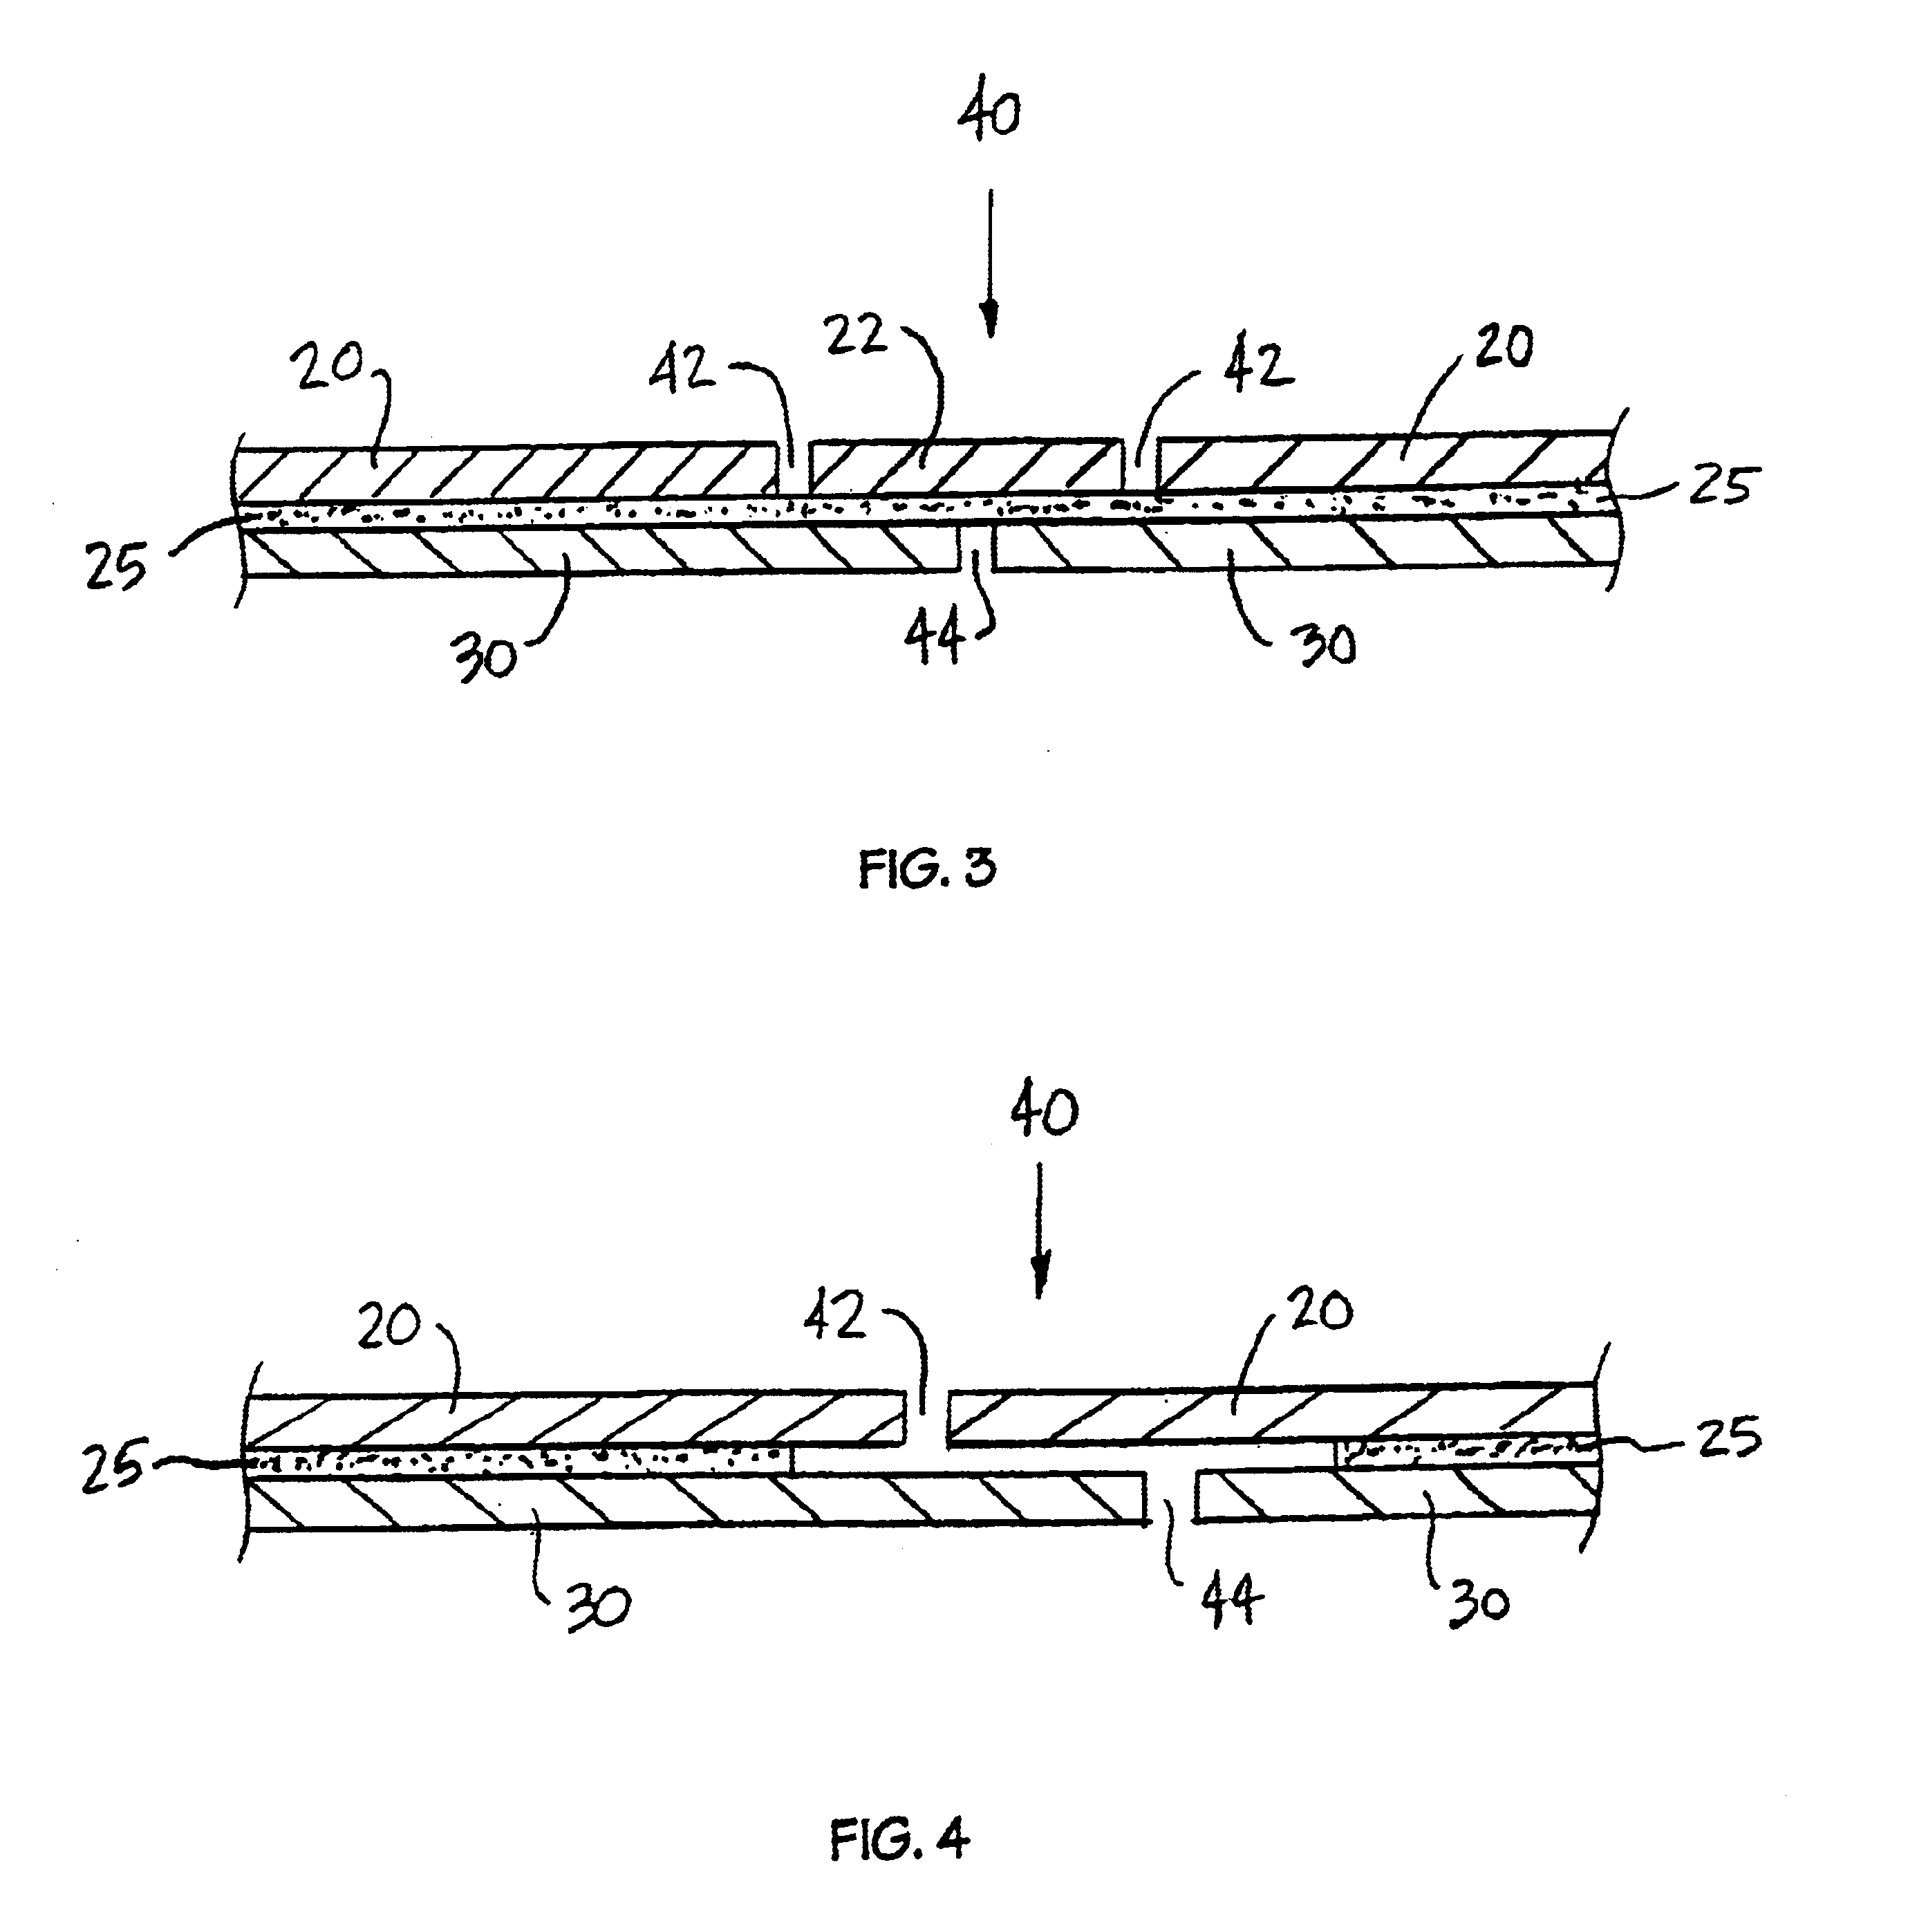 Apparatus for separating label assembly